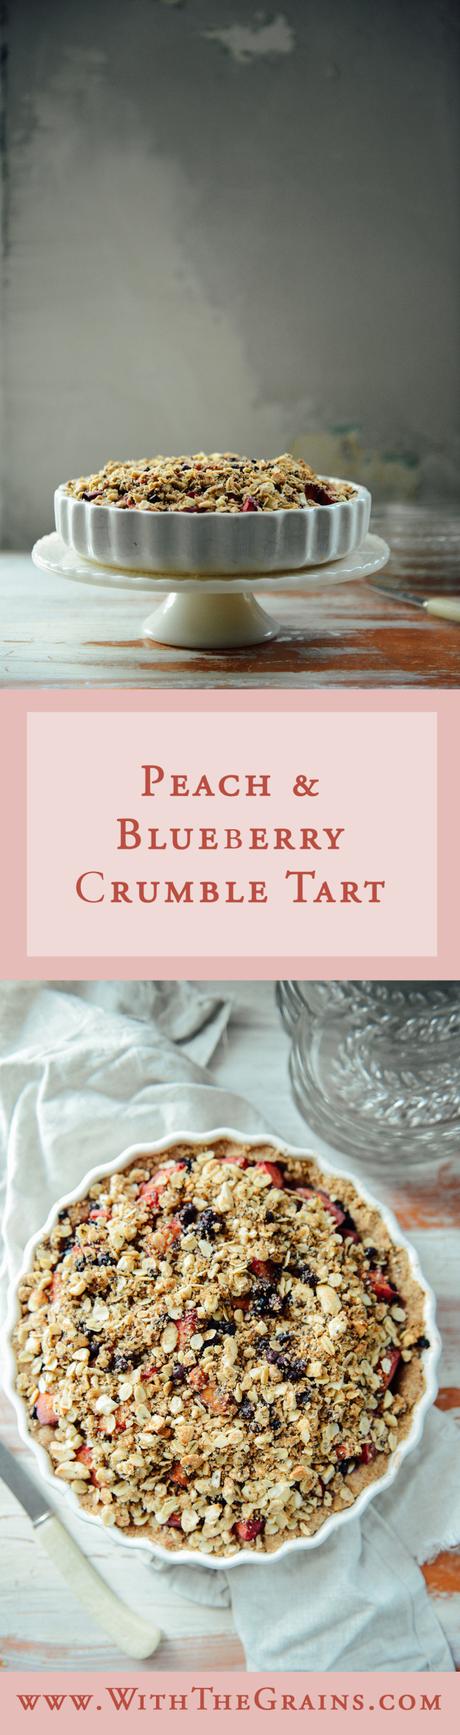 Peach Crumble Tart by With The Grains